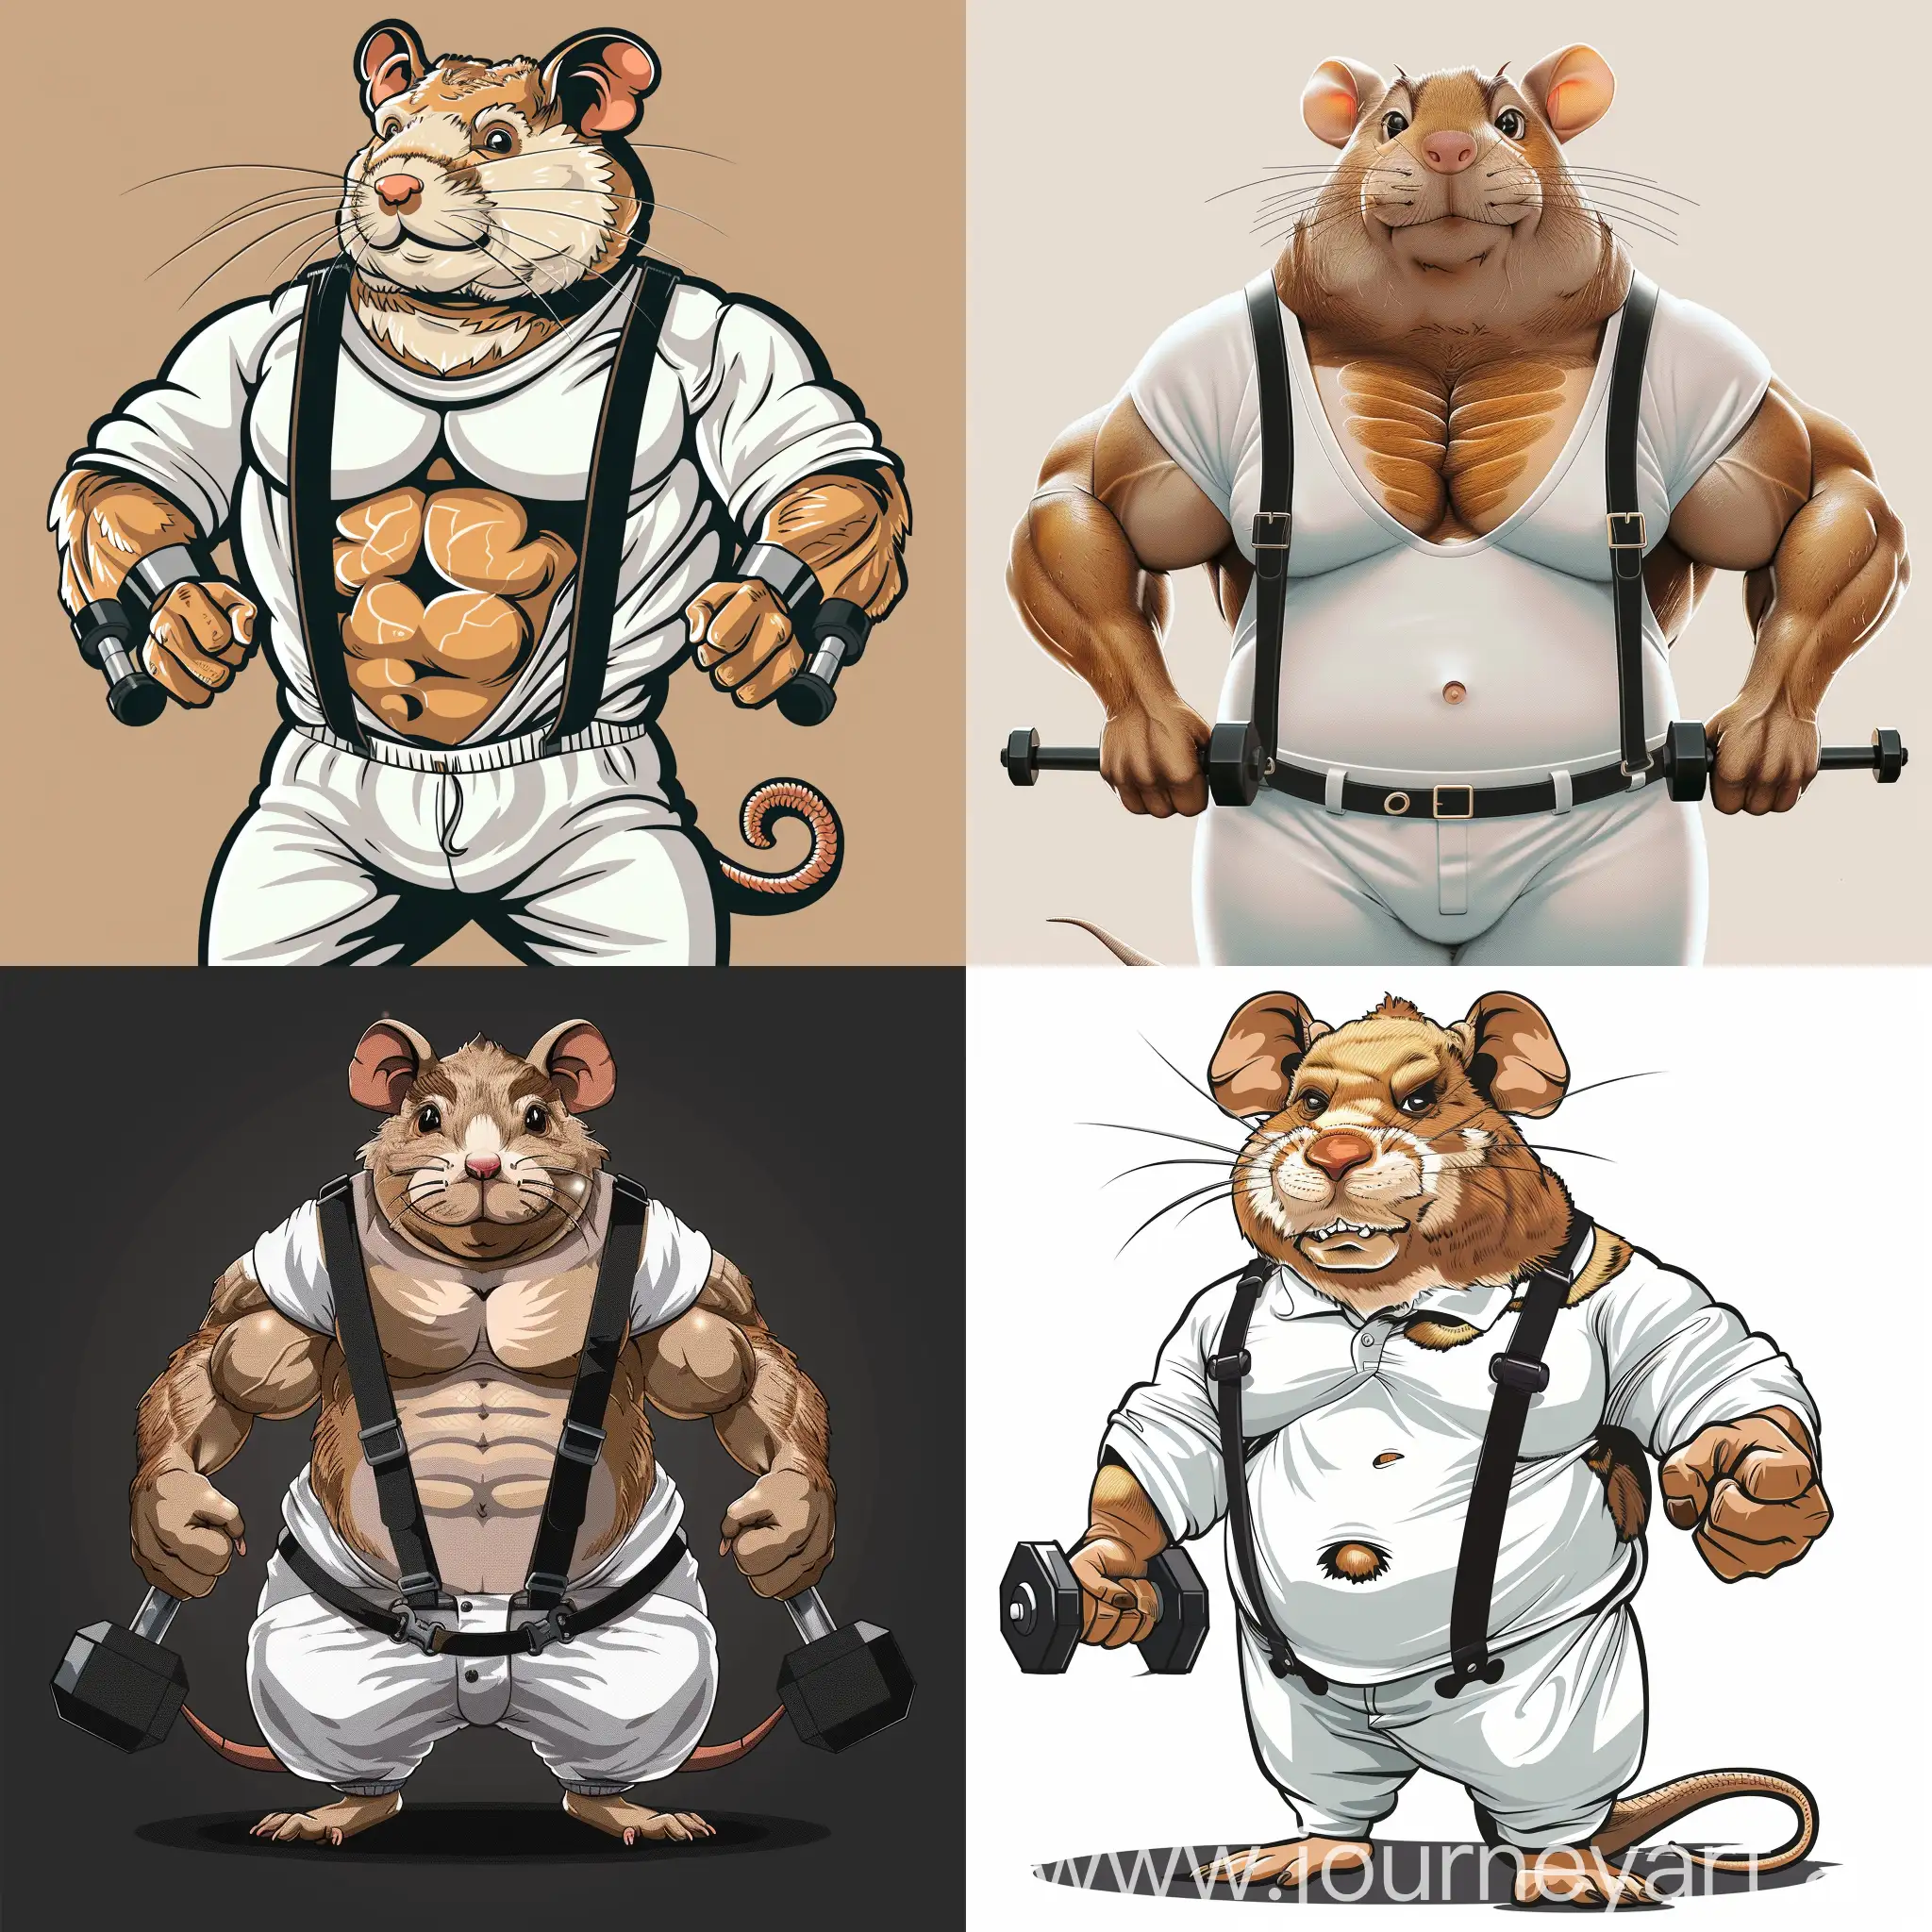 a large muscular rat with white sports clothing, showing its full body, with a marked body with abs and pectorals, a cartoon image to print on a t-shirt, the rat holds some dumbbells, one in each hand and is wearing a t-shirt black suspenders that show off his muscular body.